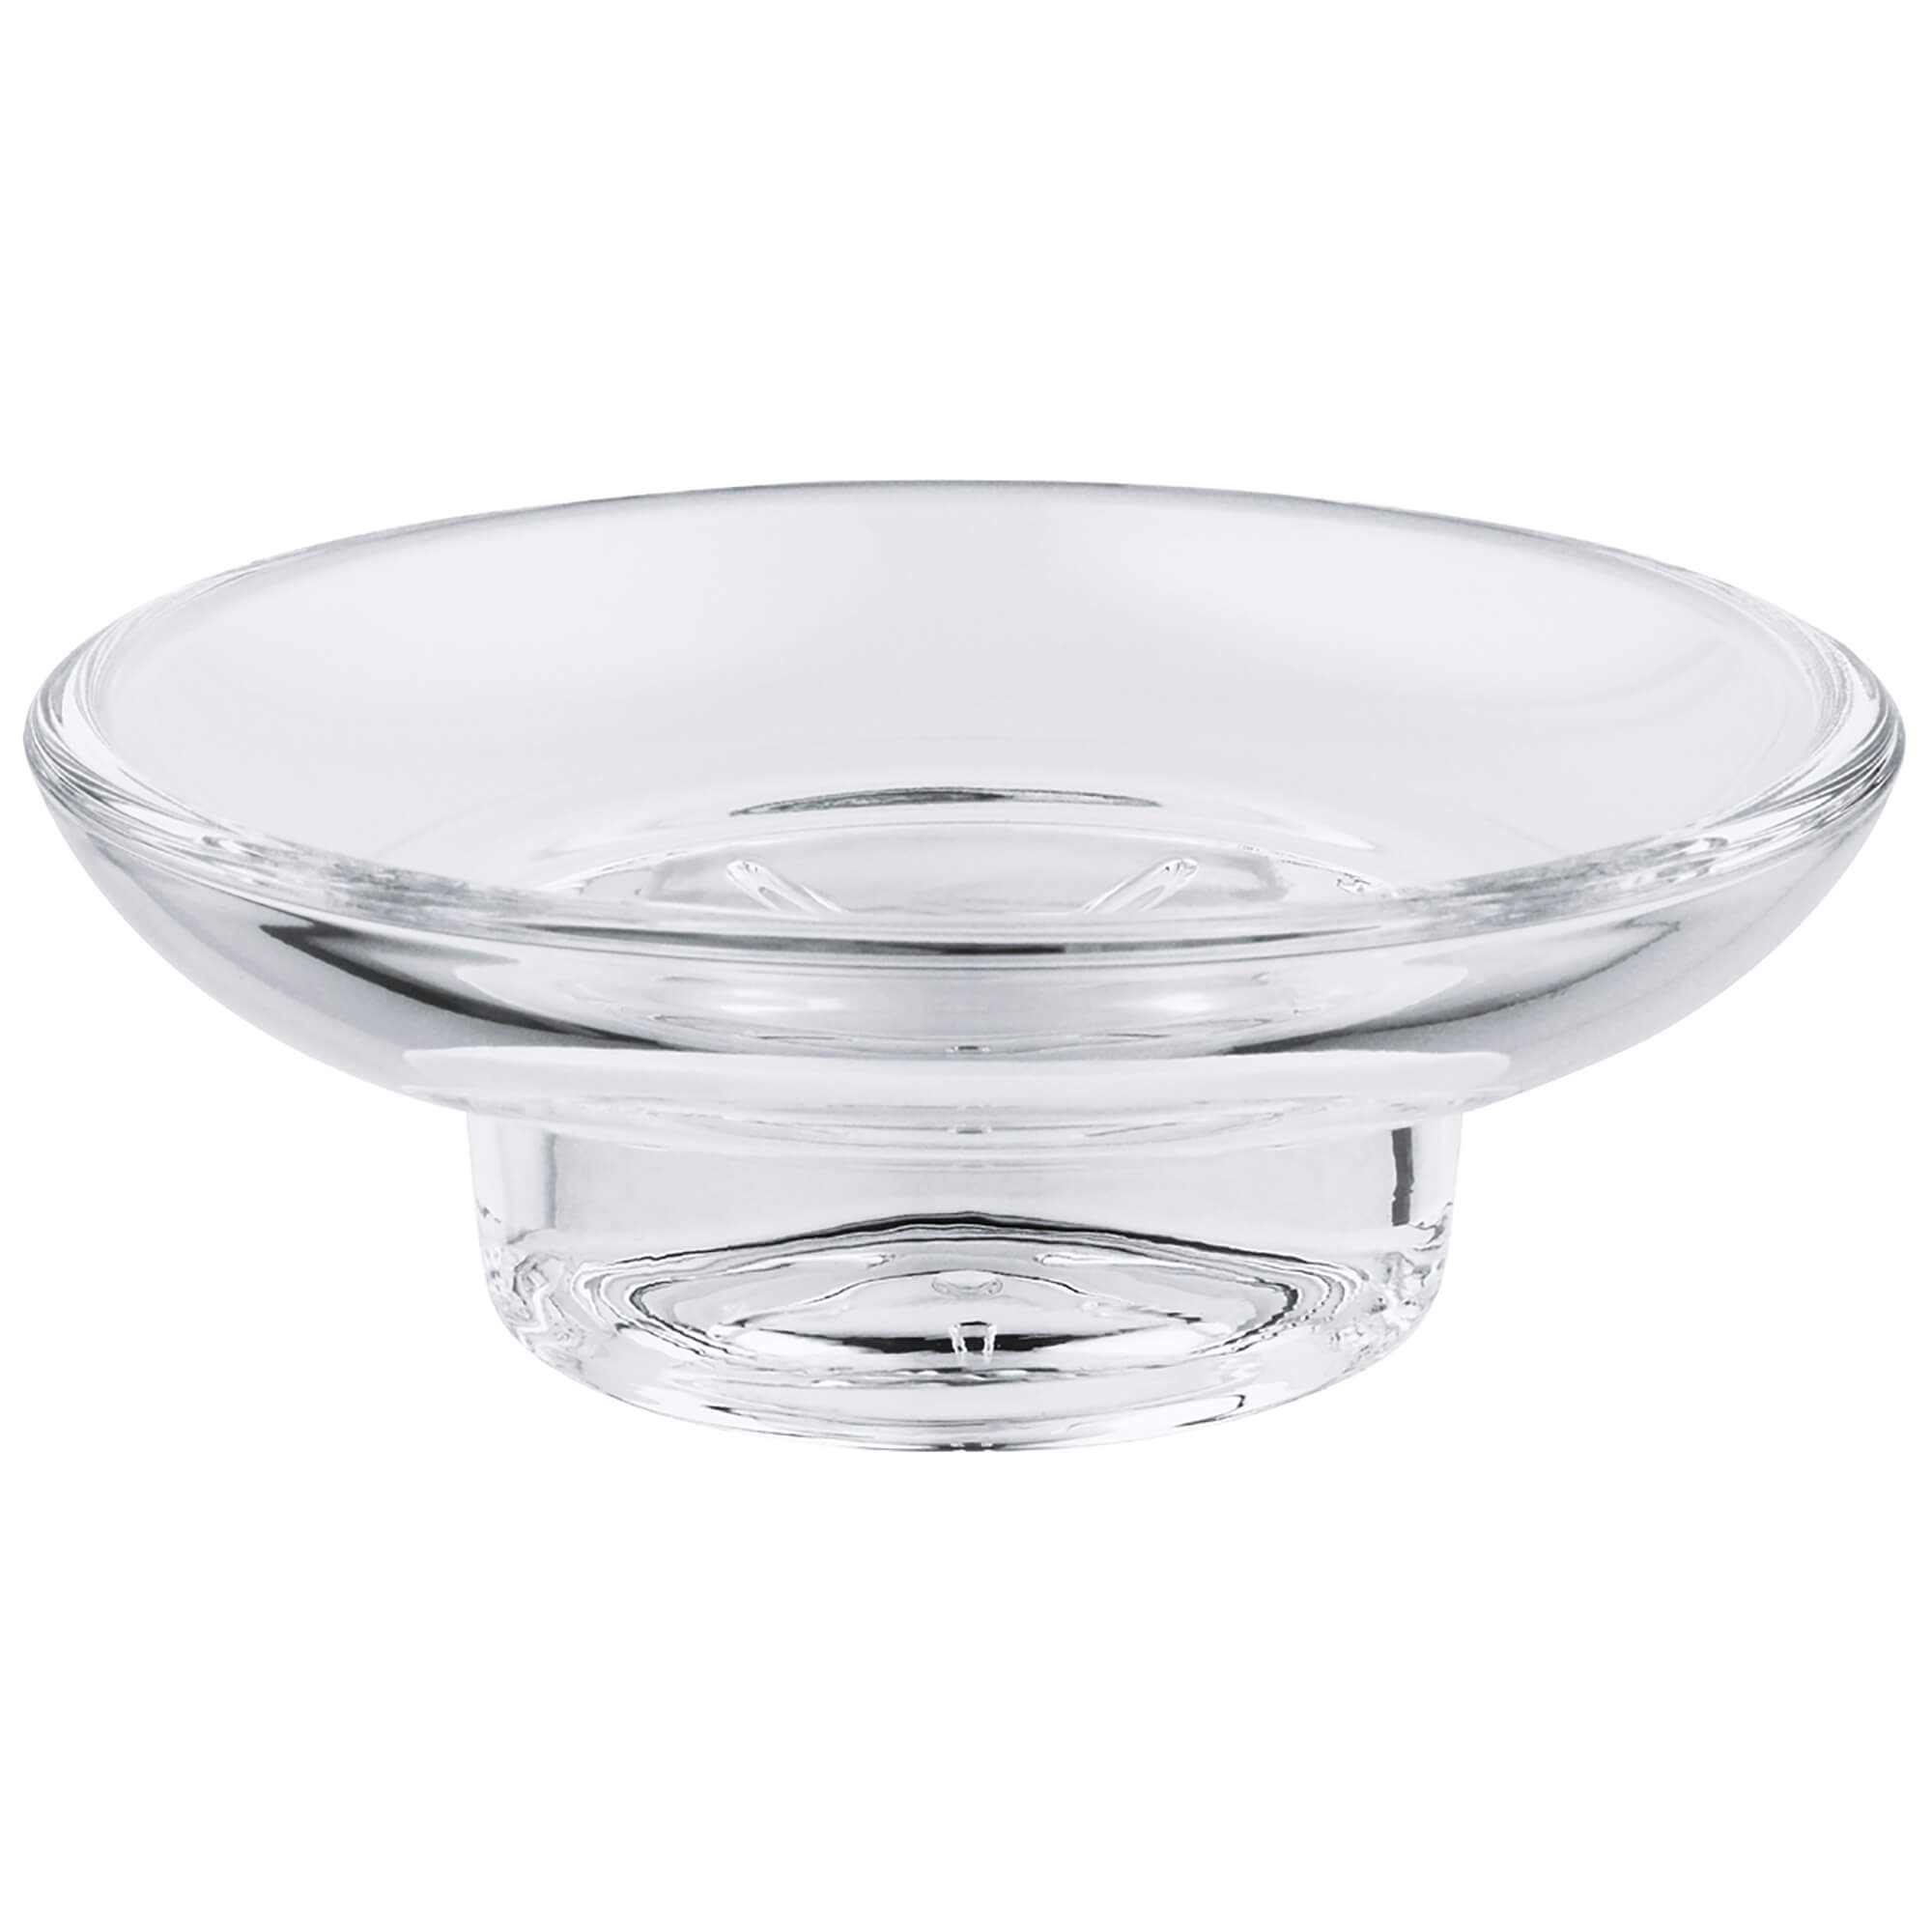 GROHE 40368001 Soap Dish, Essentials, 4-5/16 in W x 1-9/16 in H, Glass, StarLight® Polished Chrome